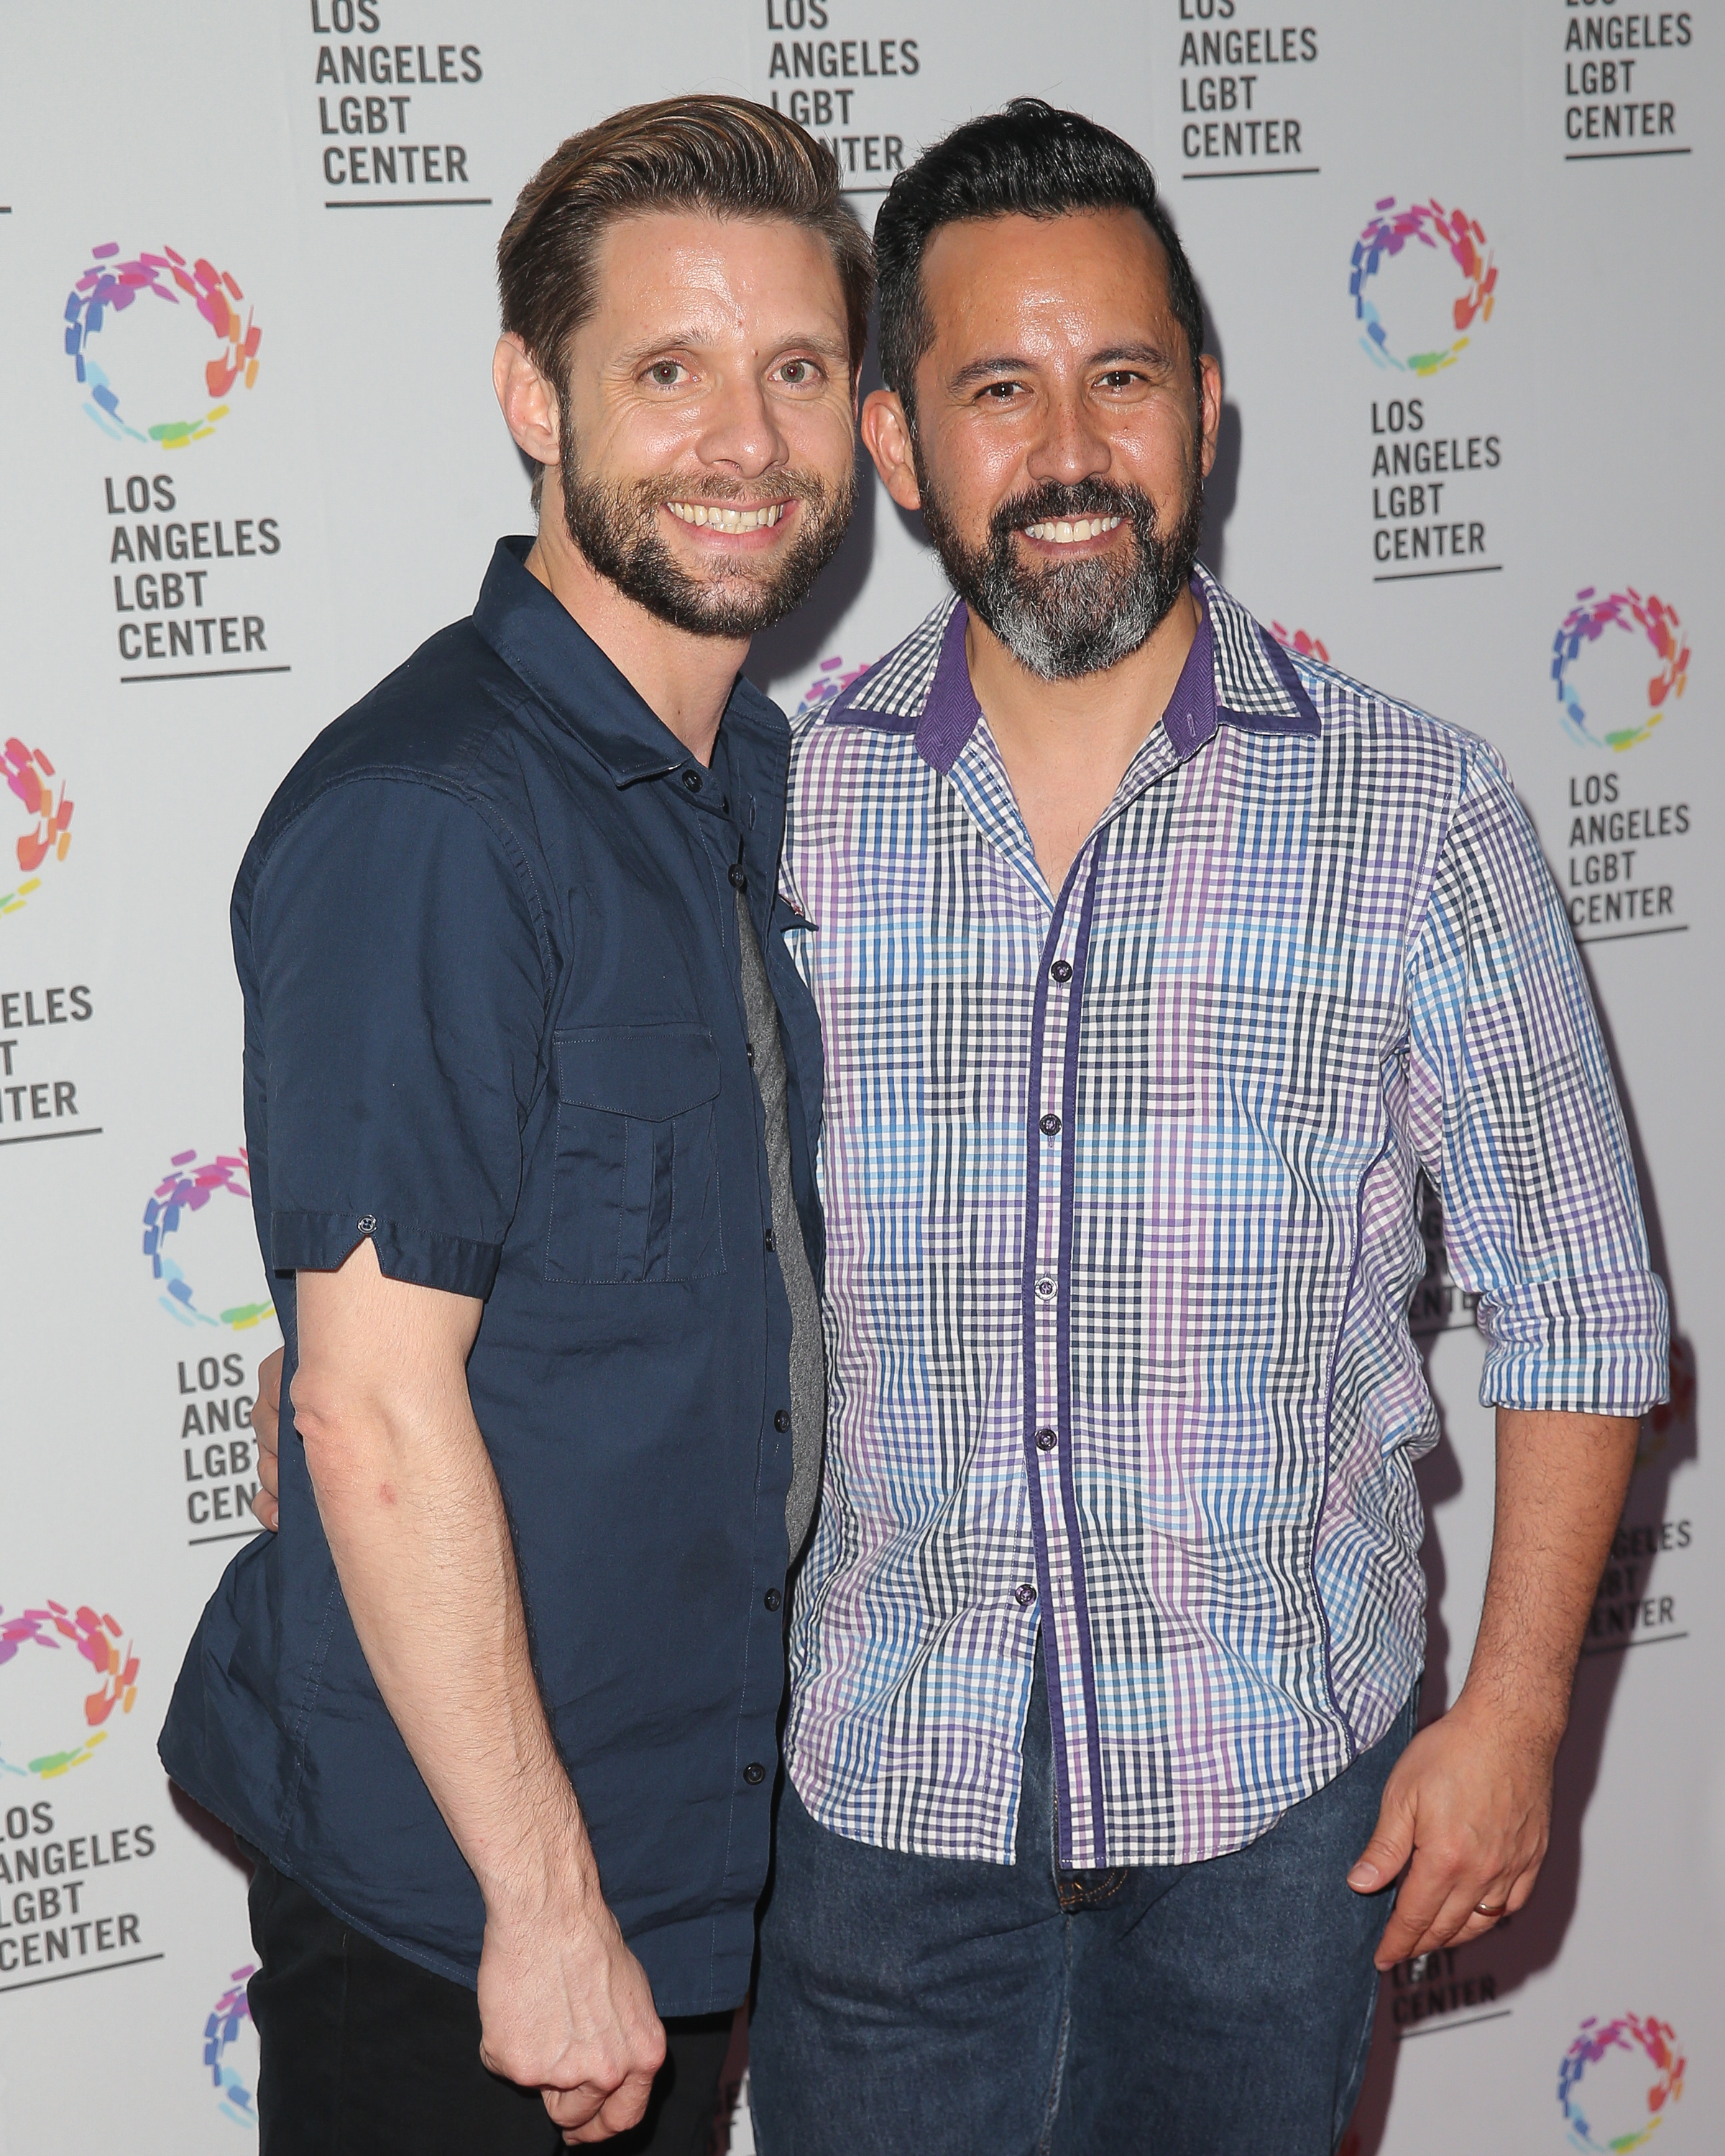 Danny Pintauro and Wil Tabares at The Village at Ed Gould Plaza on September 28, 2015, in Los Angeles, California. | Source: Getty Images